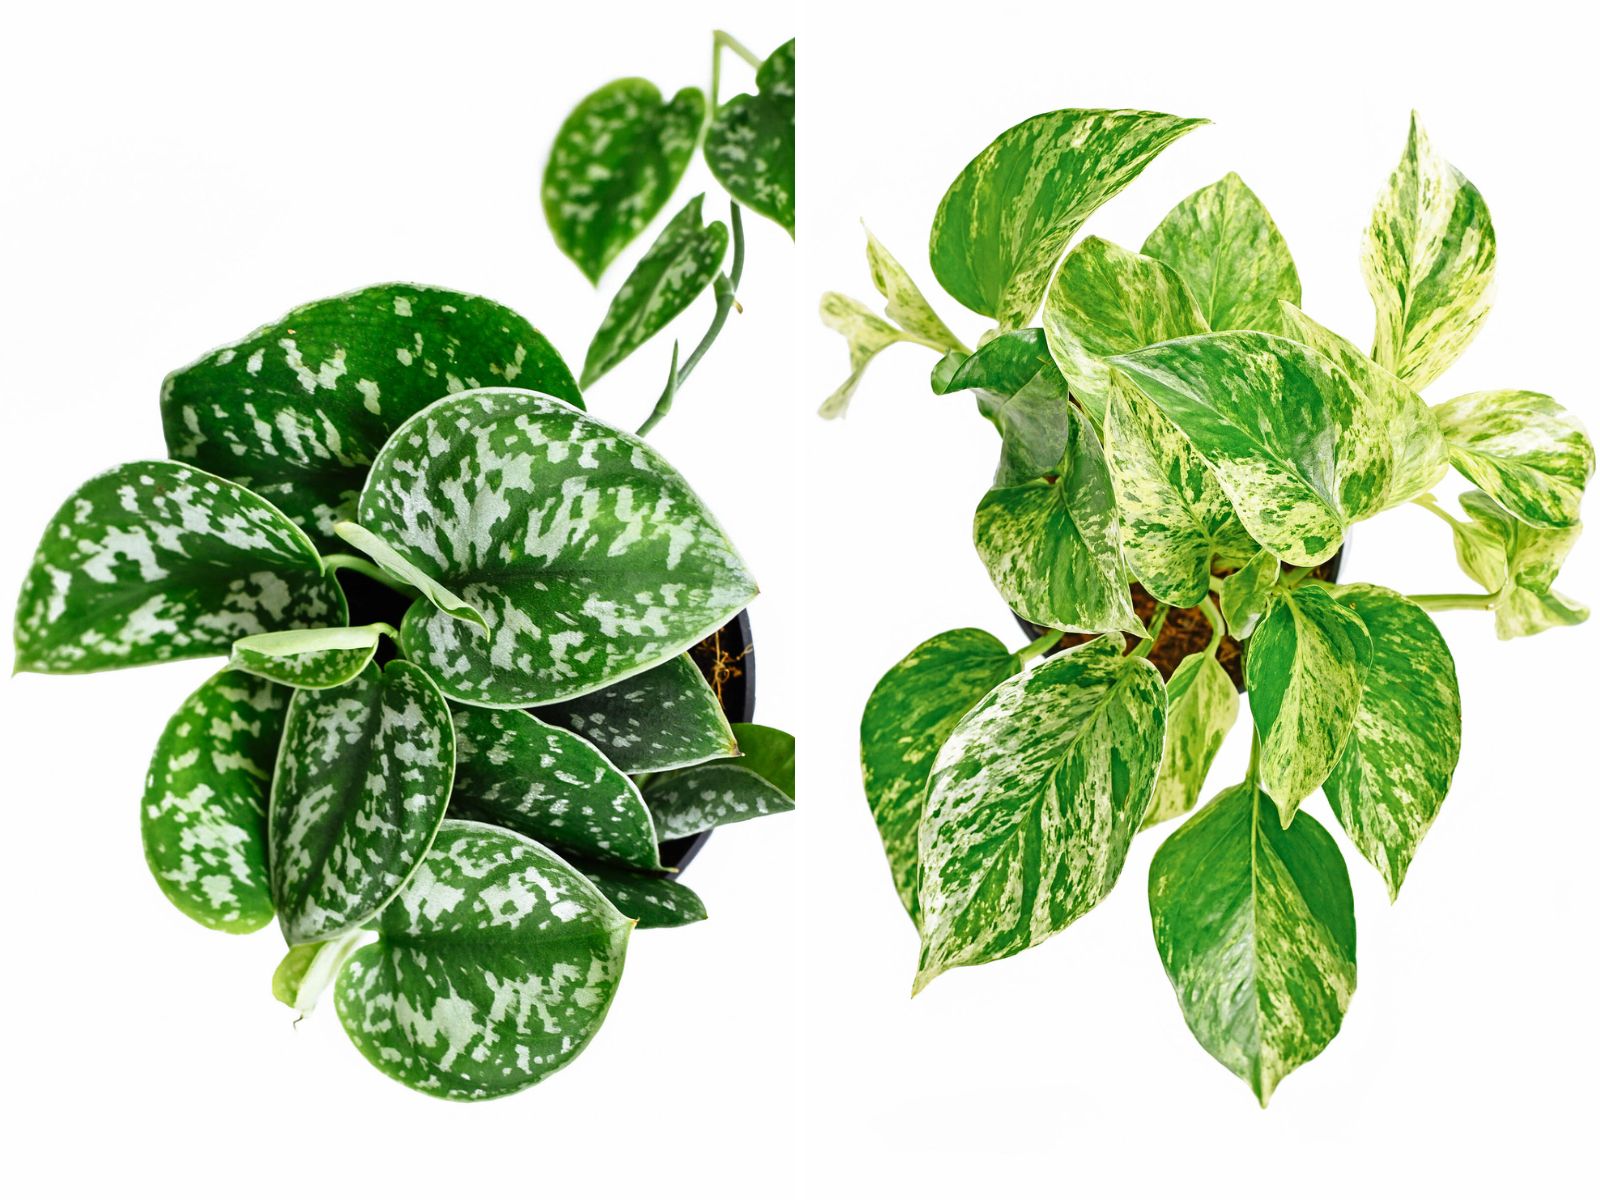 Side by side comparison of satin Pothos (left) and golden Pothos (right)